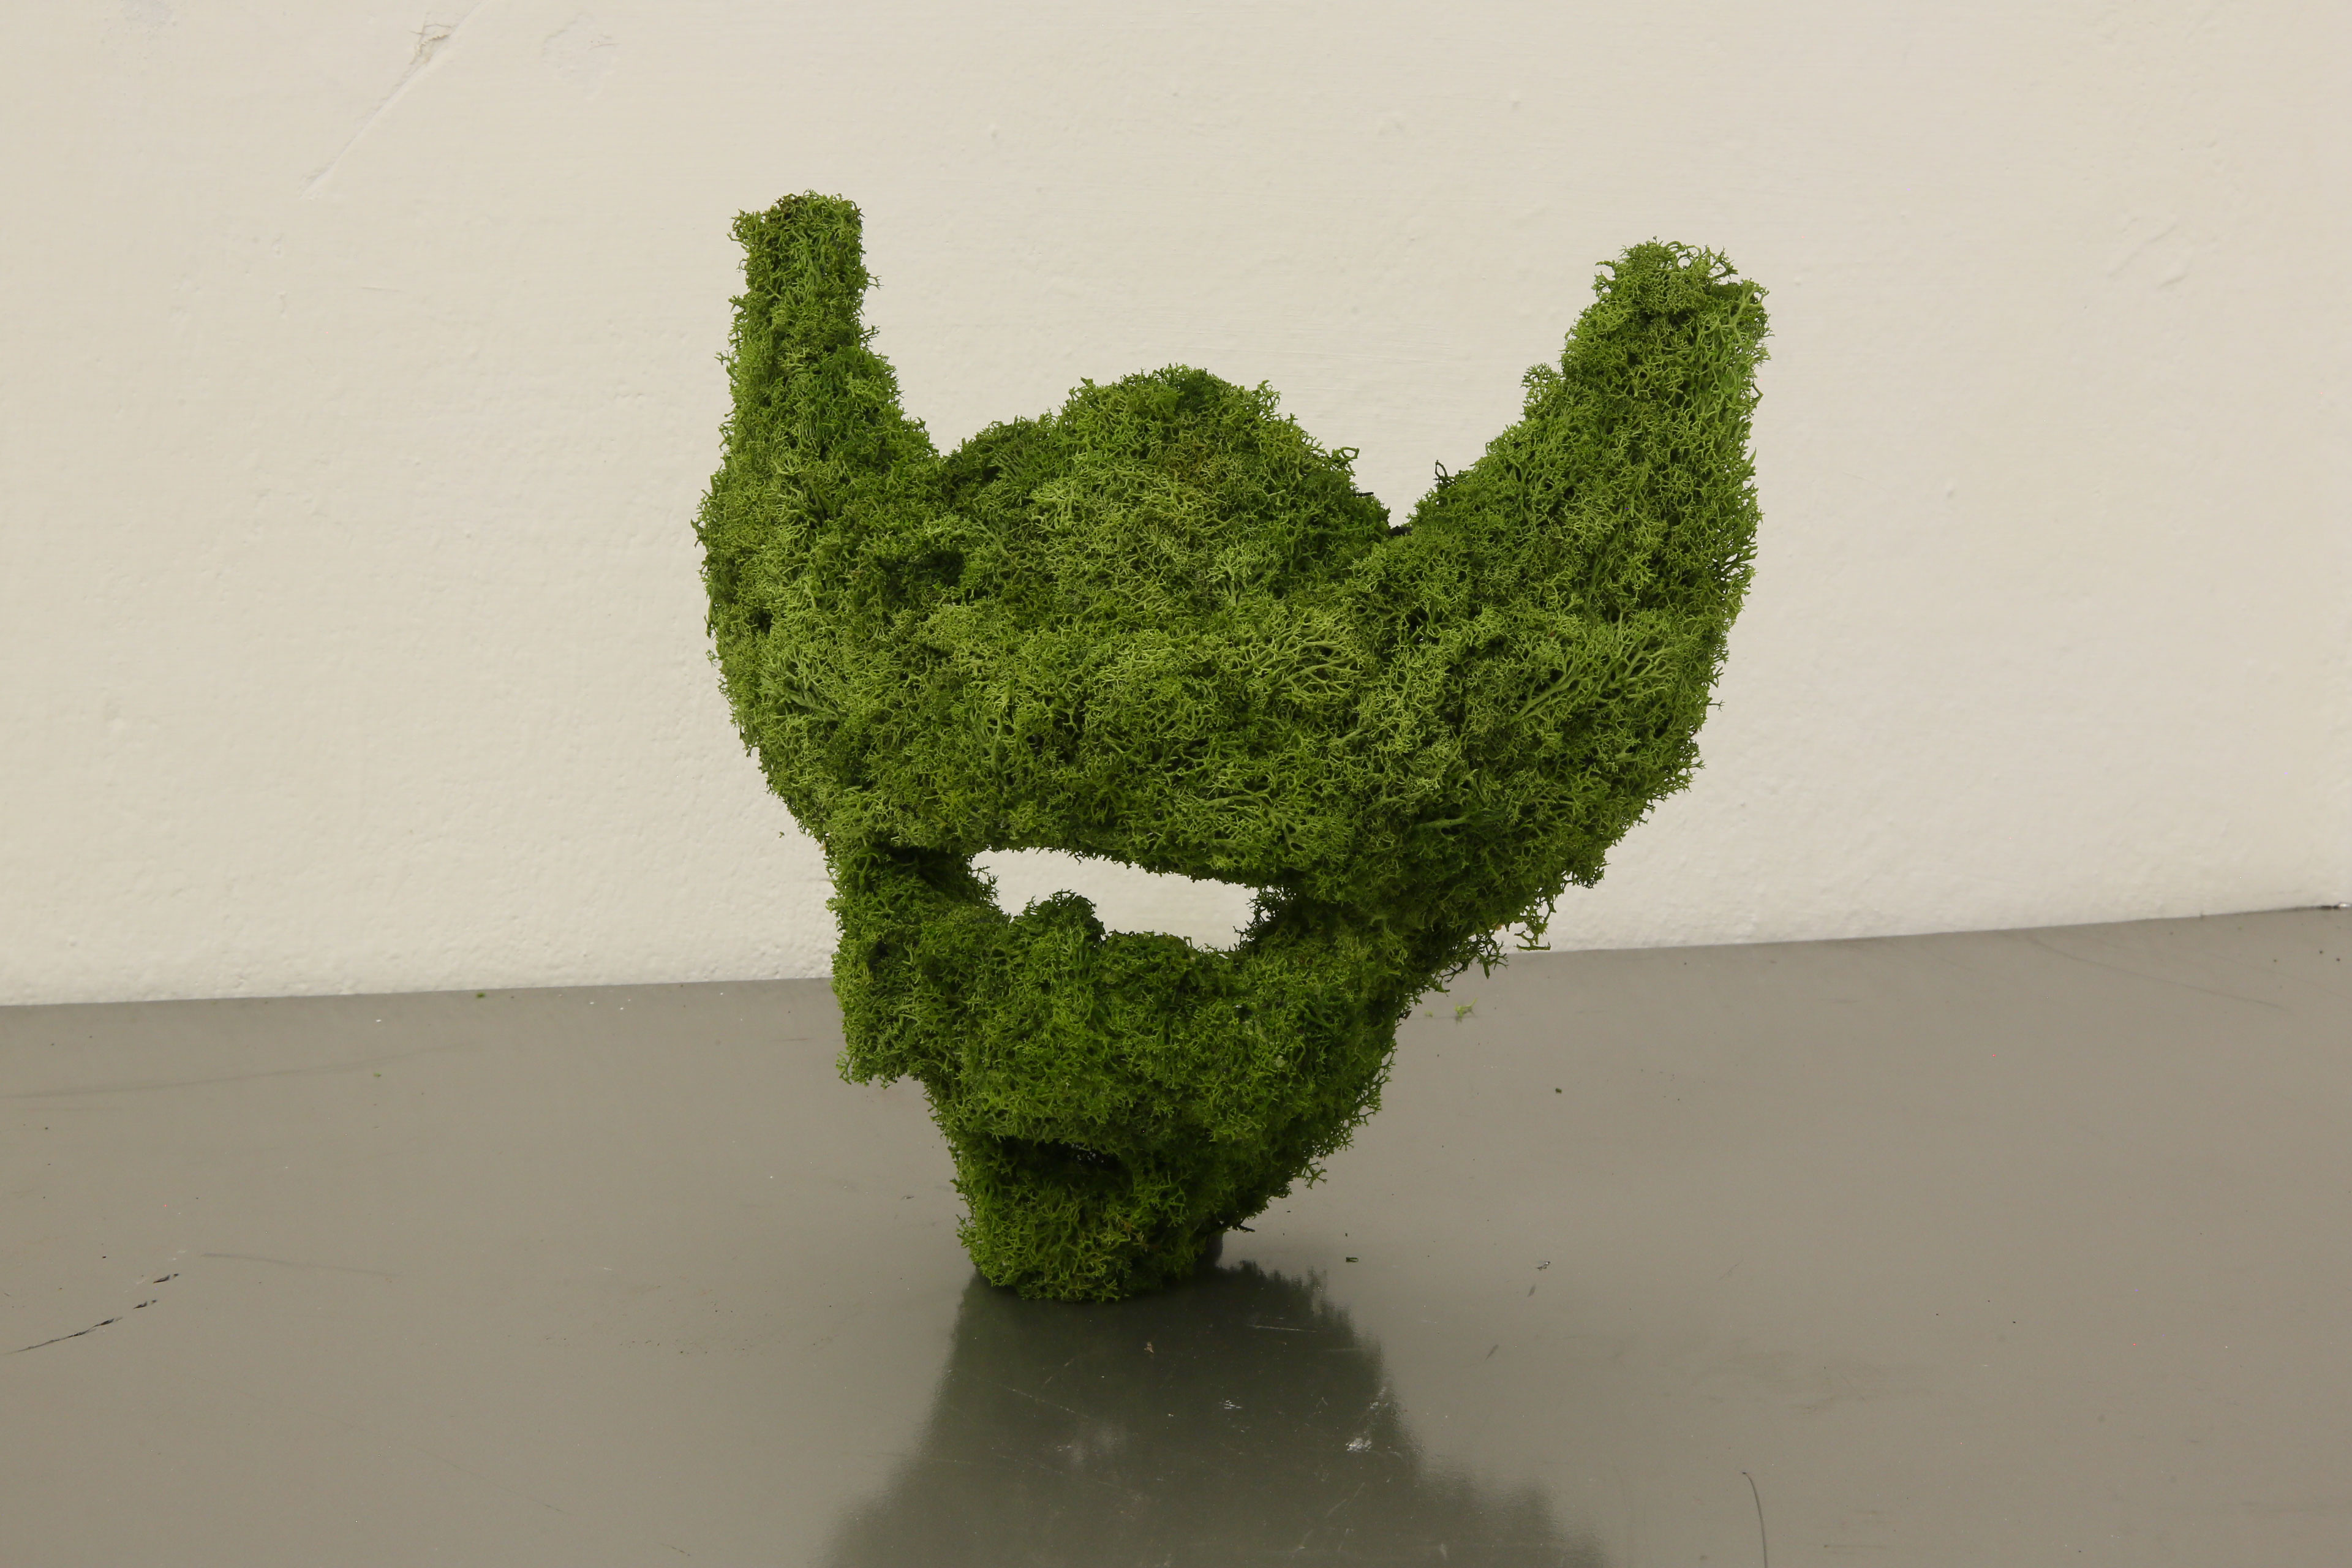 “Moss Mask”
Moss Mask
30 x 30 X 32 cm
(variables dimensions) 2019